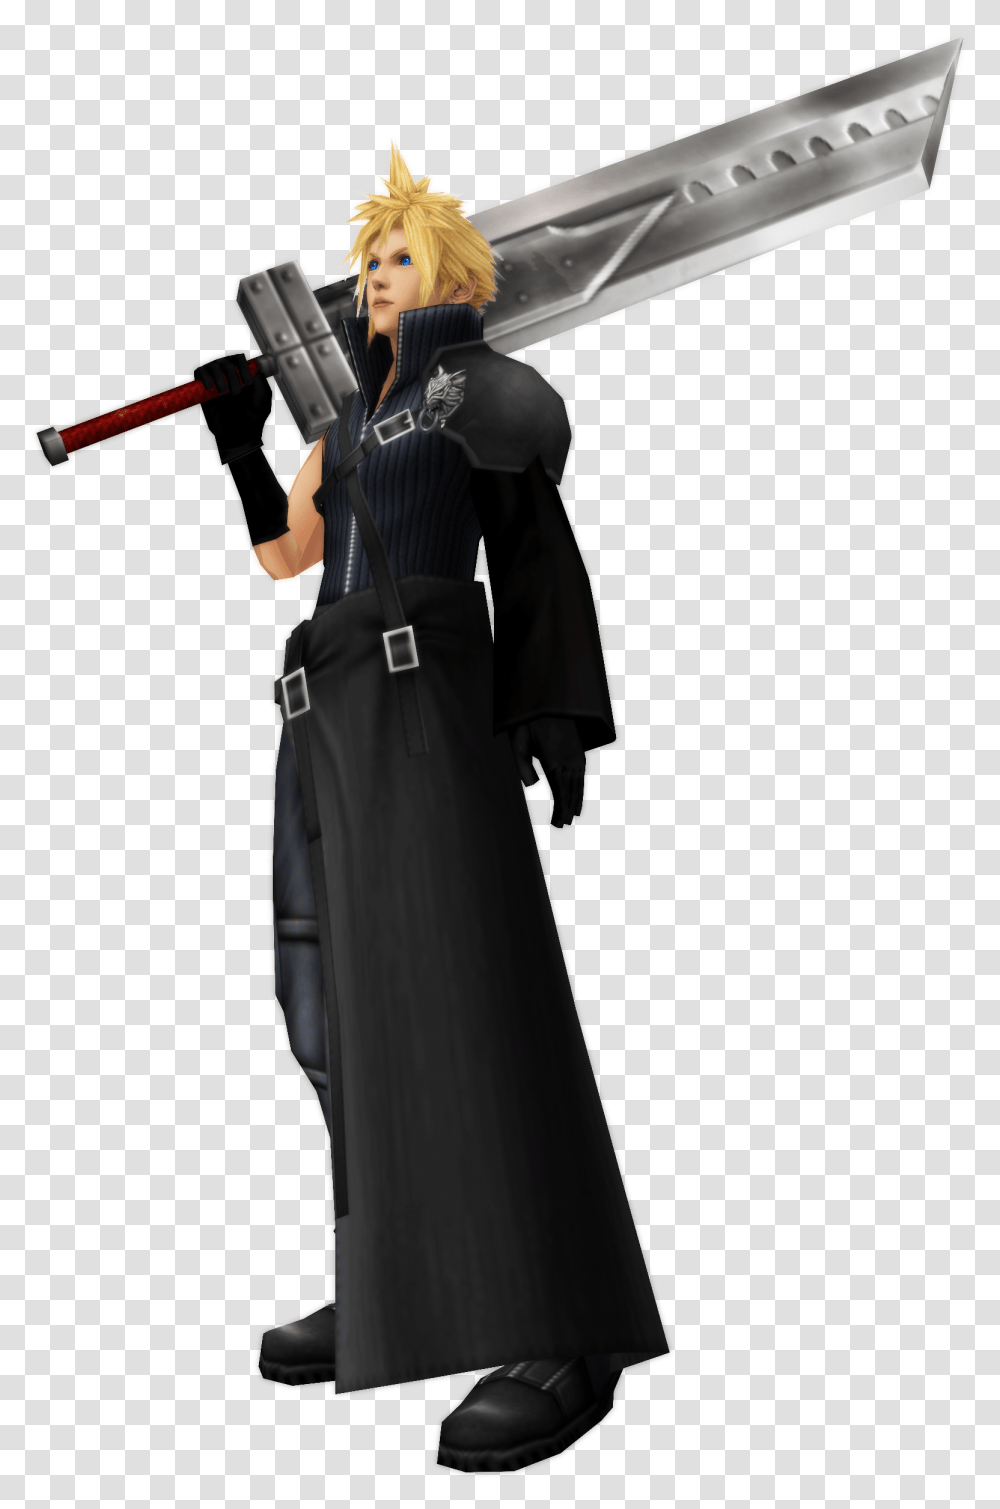 Cloud Strife Free Download Cloud Strife Mmd Model, Person, Human, Apparel Transparent Png